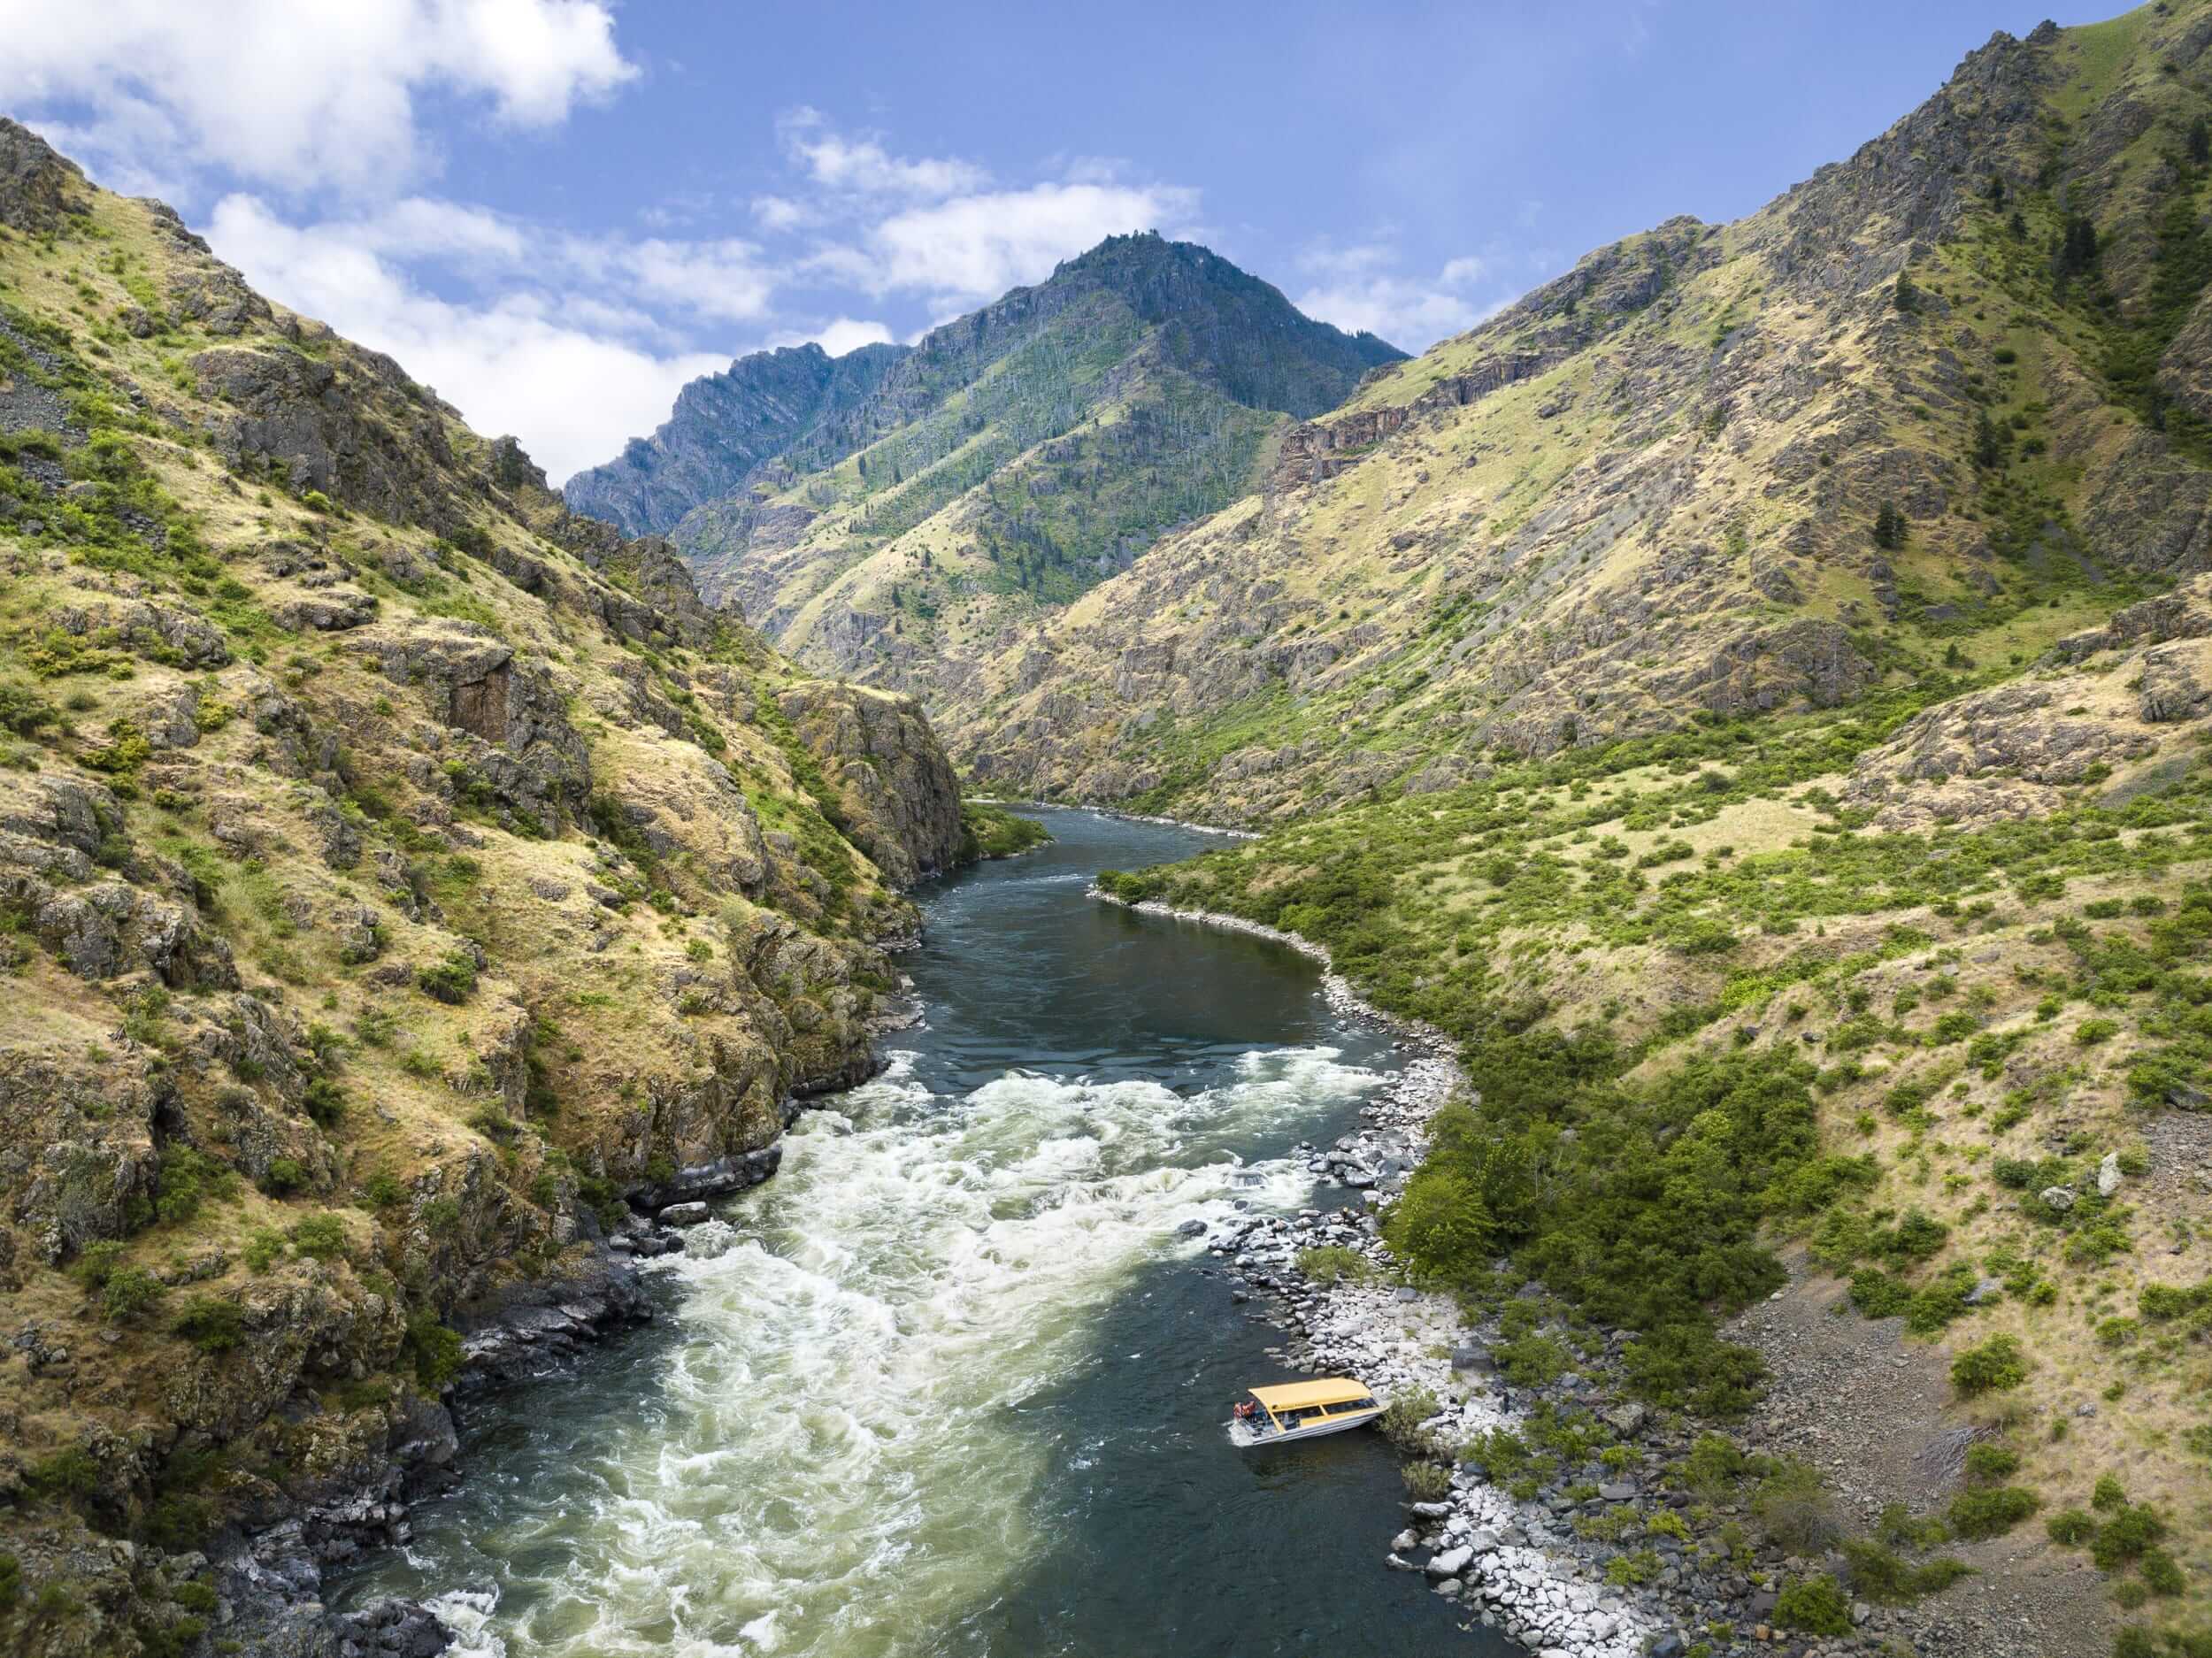 An aerial view of a yellow jet boat on the bank of the Snake River in Hells Canyon.